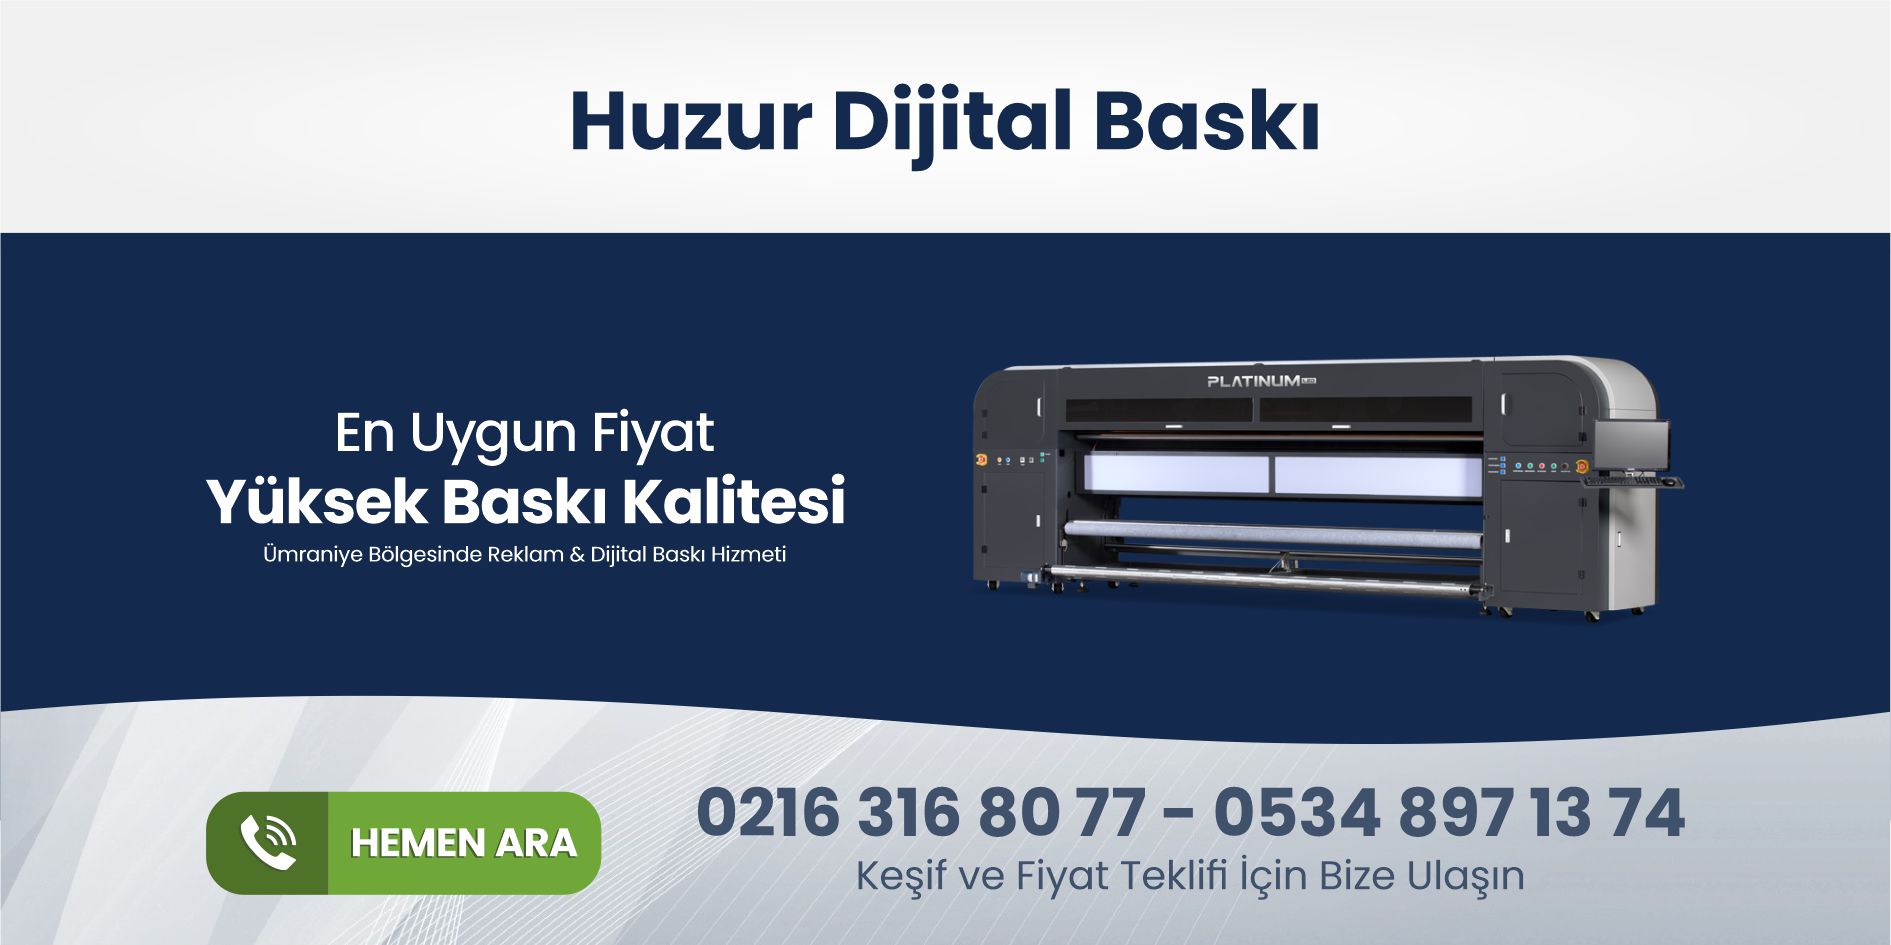 You are currently viewing Huzur Dijital Baskı